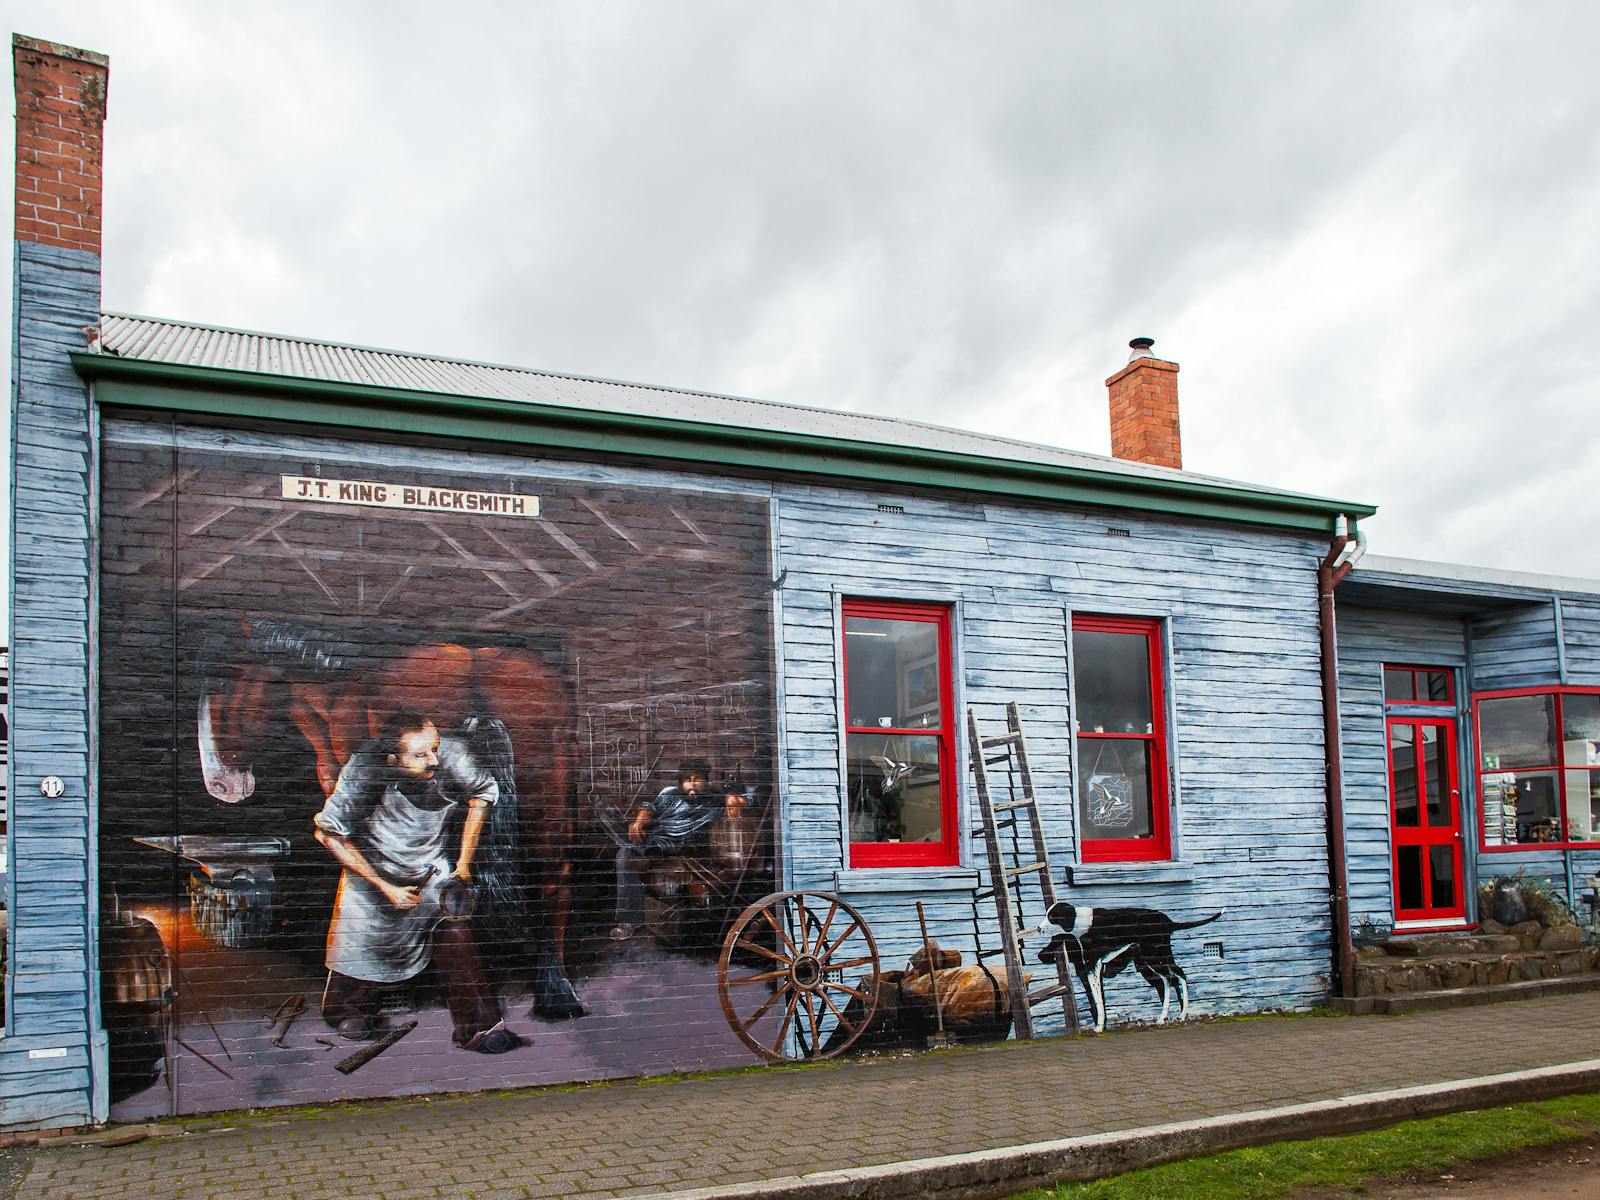 Sheffield is 30 minutes from Devonport and the town of murals